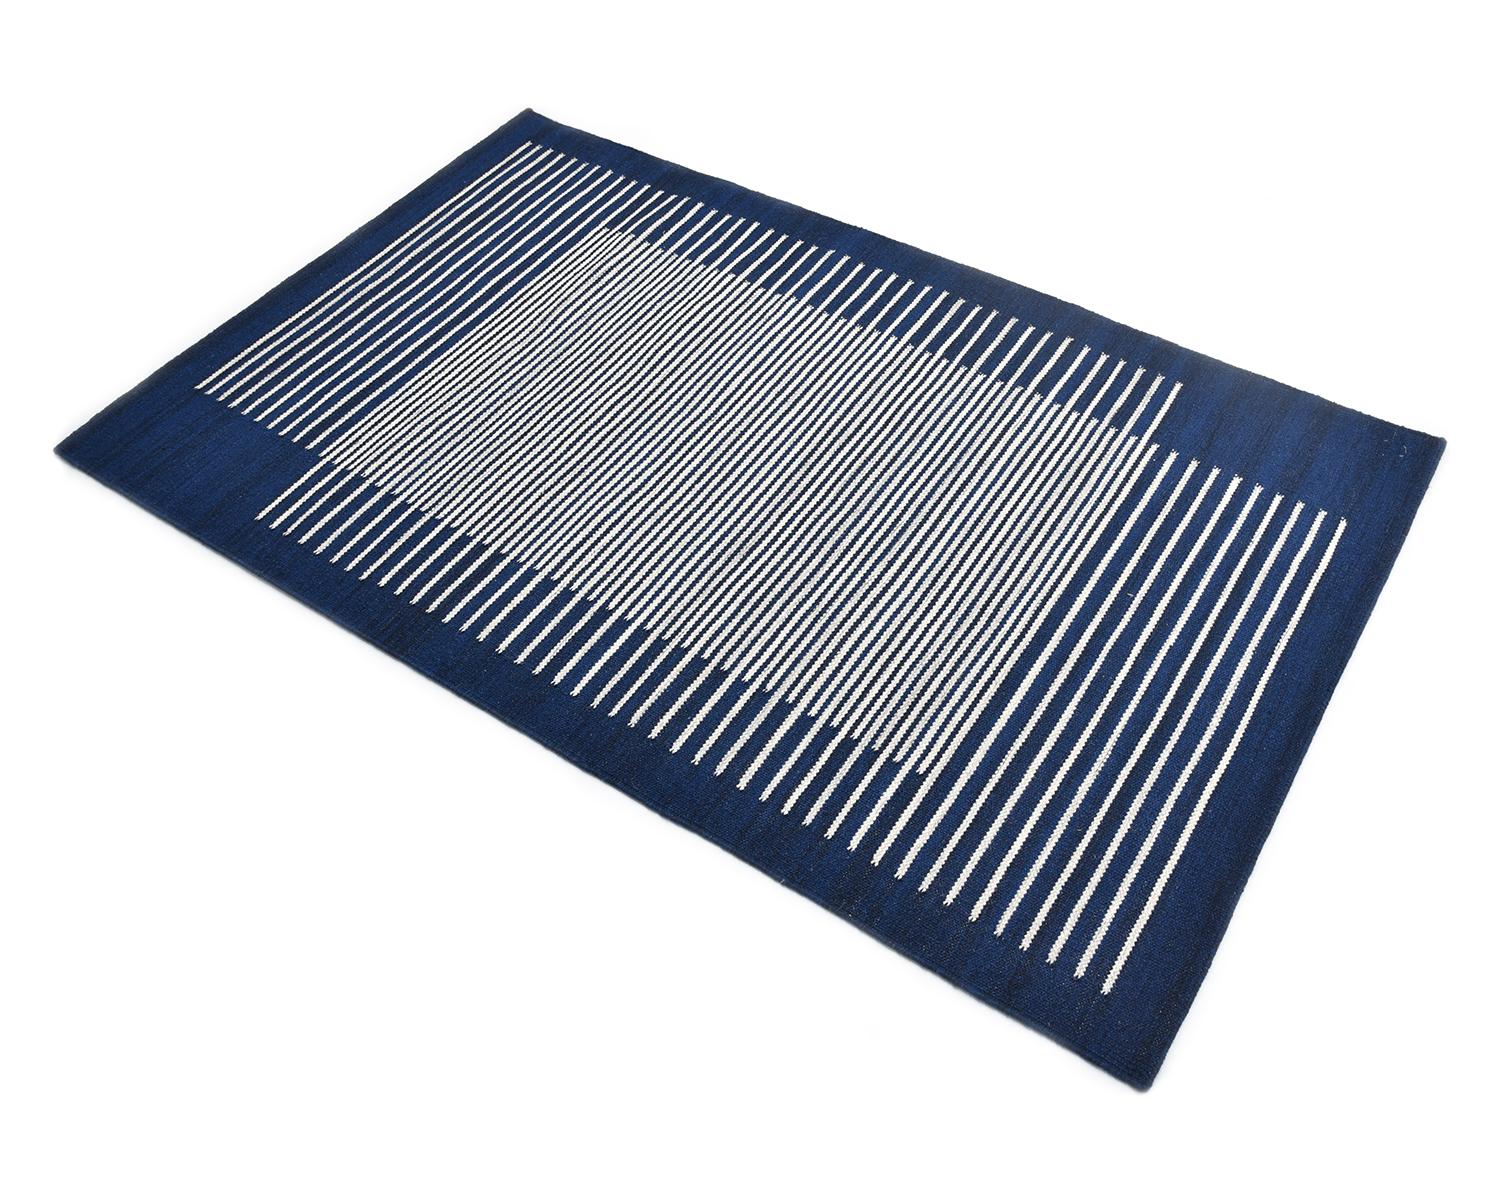 Solo Rugs Flatweave Striped Hand Woven Blue Area Rug For Sale 1